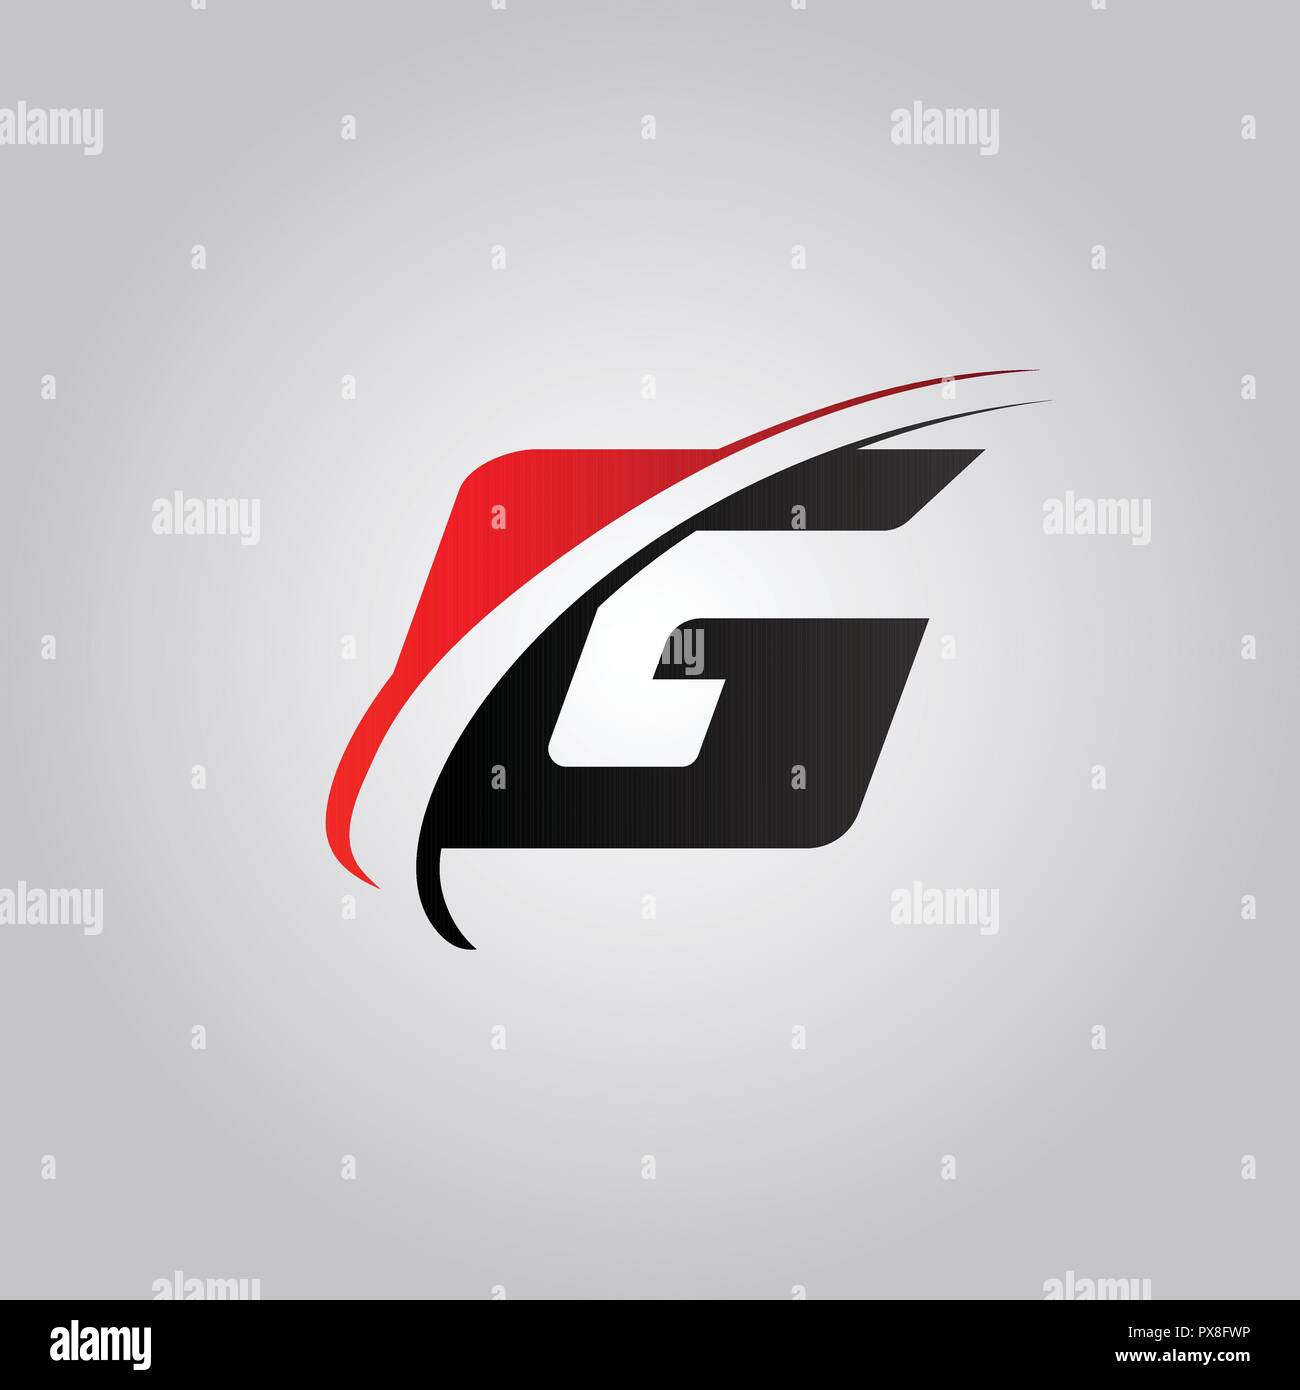 initial G Letter logo with swoosh colored red and black Stock Vector